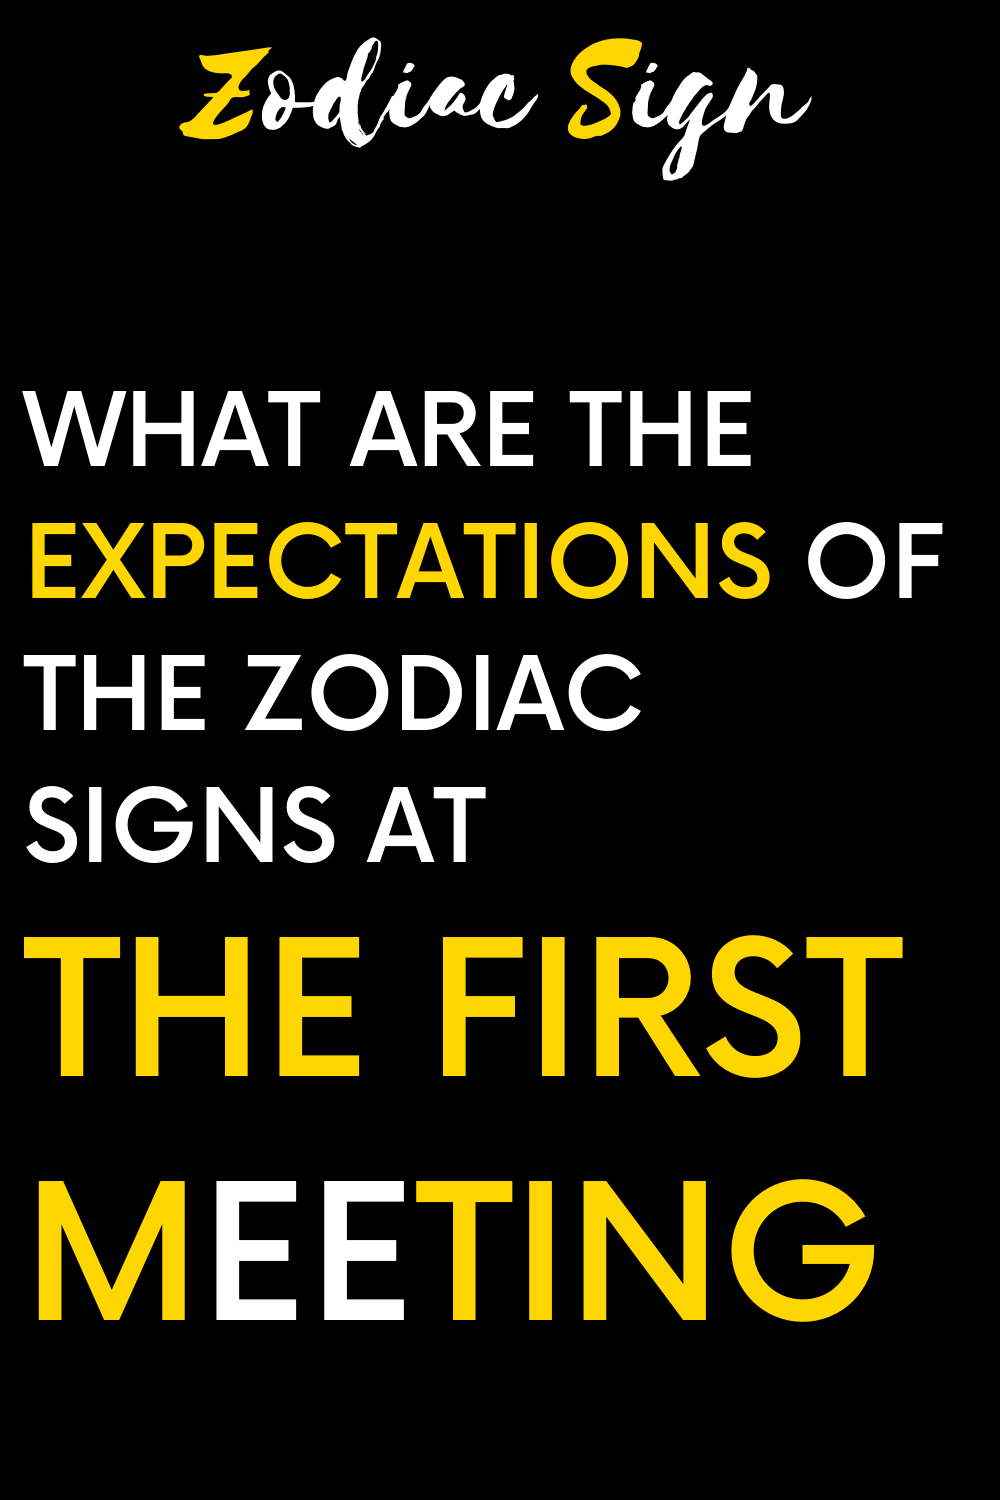 What are the expectations of the zodiac signs at the first meeting